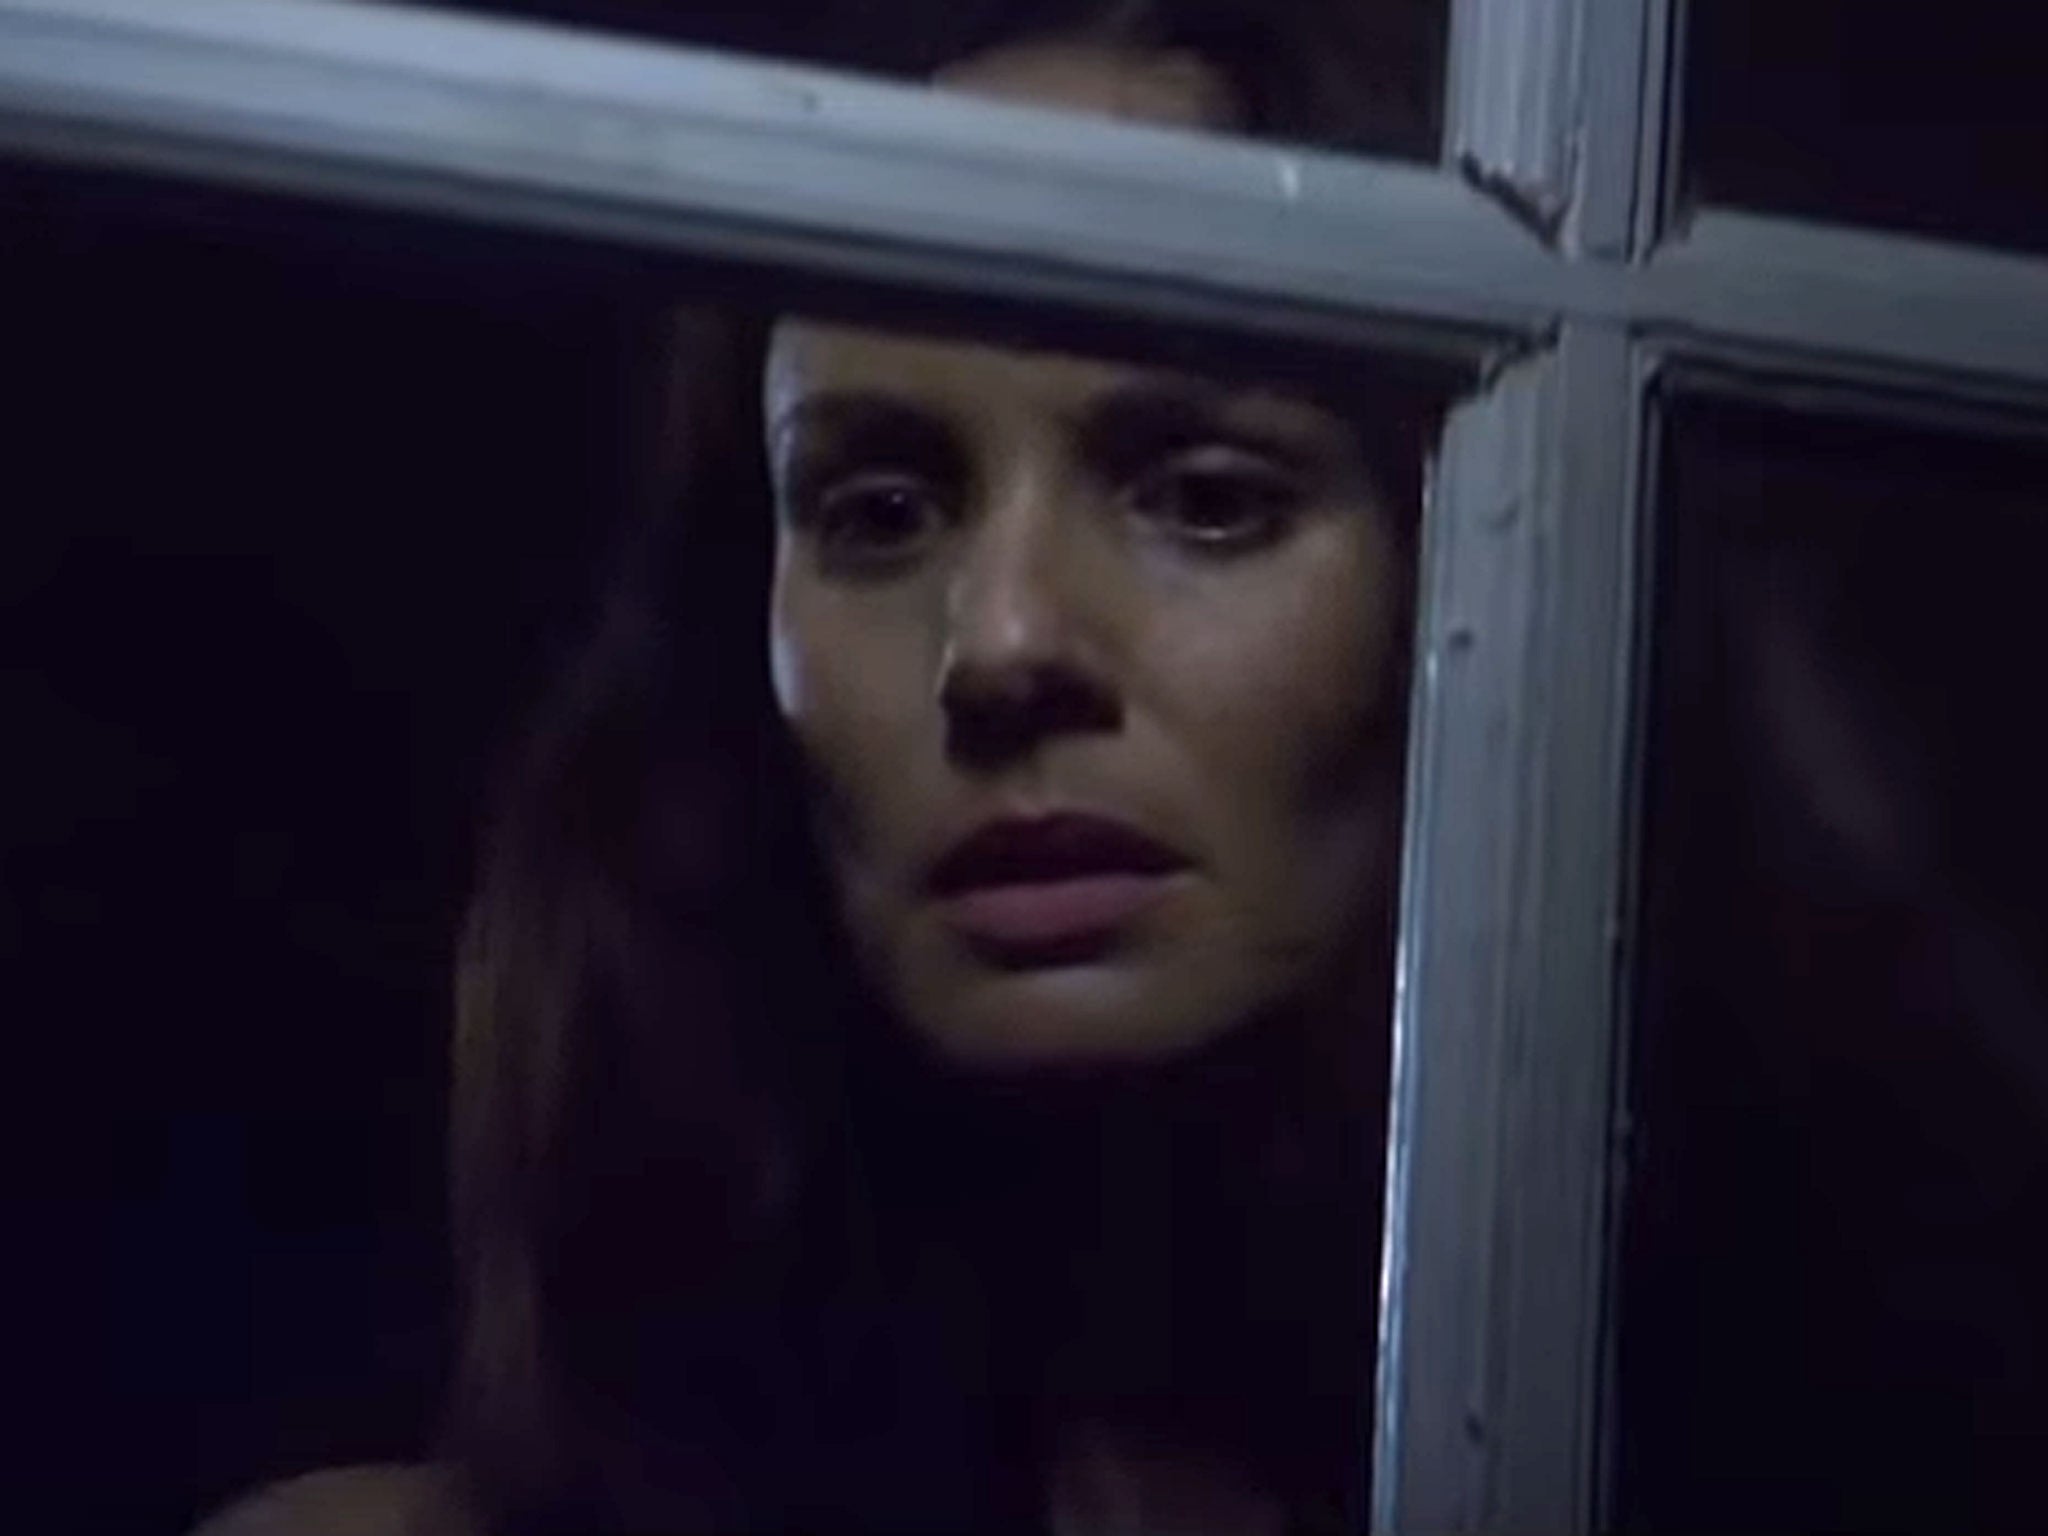 Sarah Wayne Callies stars as a mother devastated by the drowning of her young son